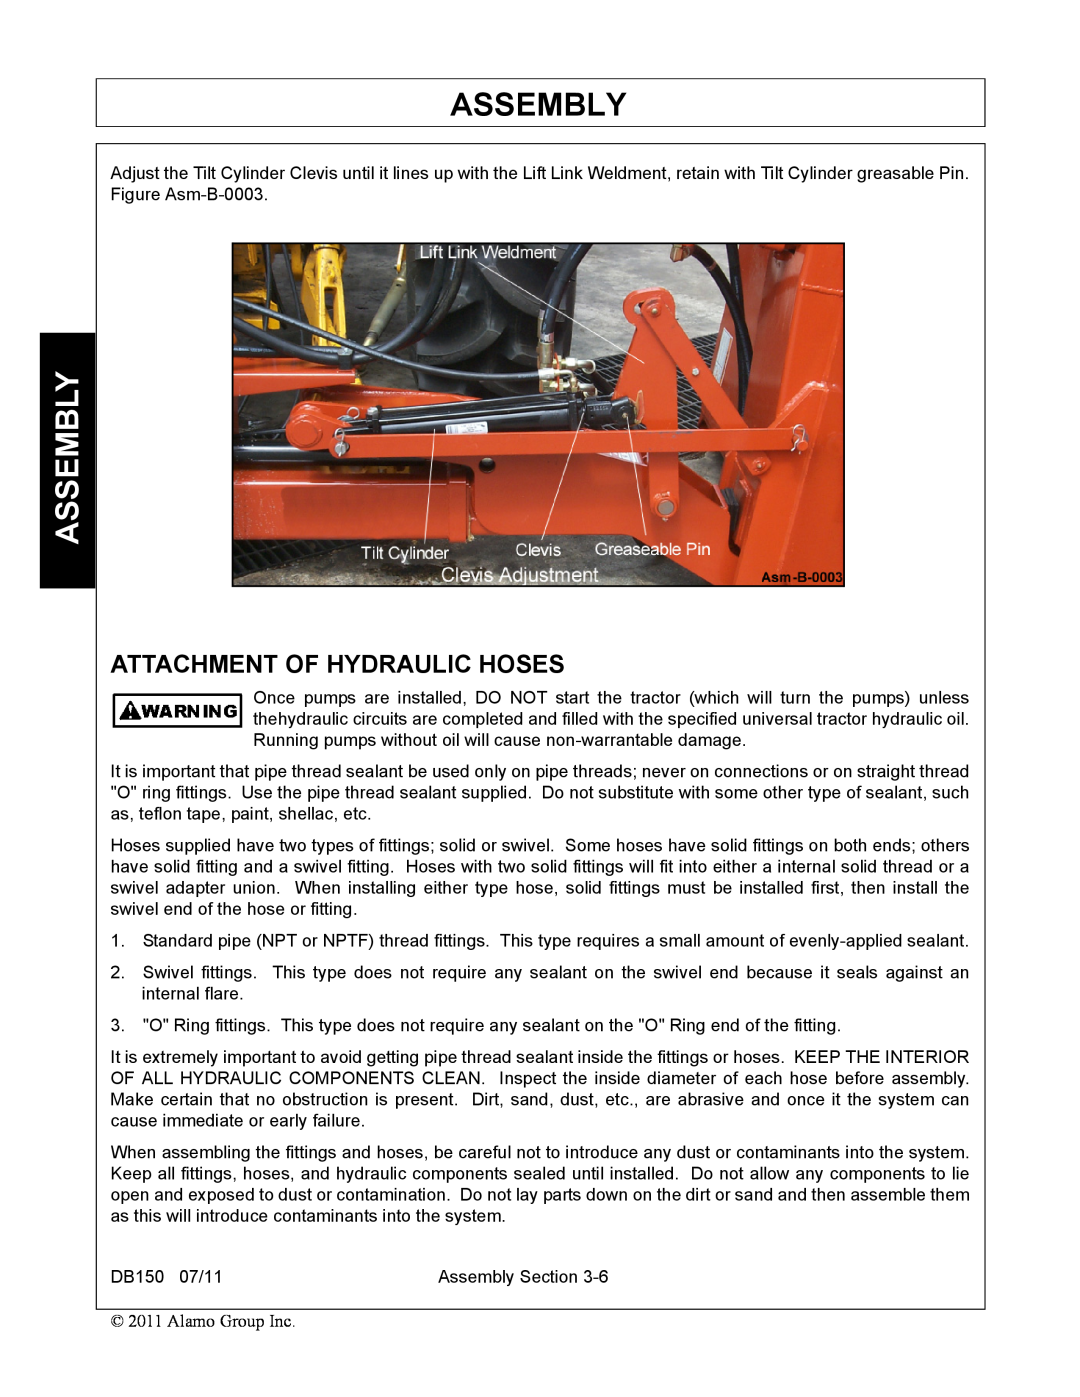 Rhino Mounts DB150 manual Attachment Of Hydraulic Hoses, Assembly 